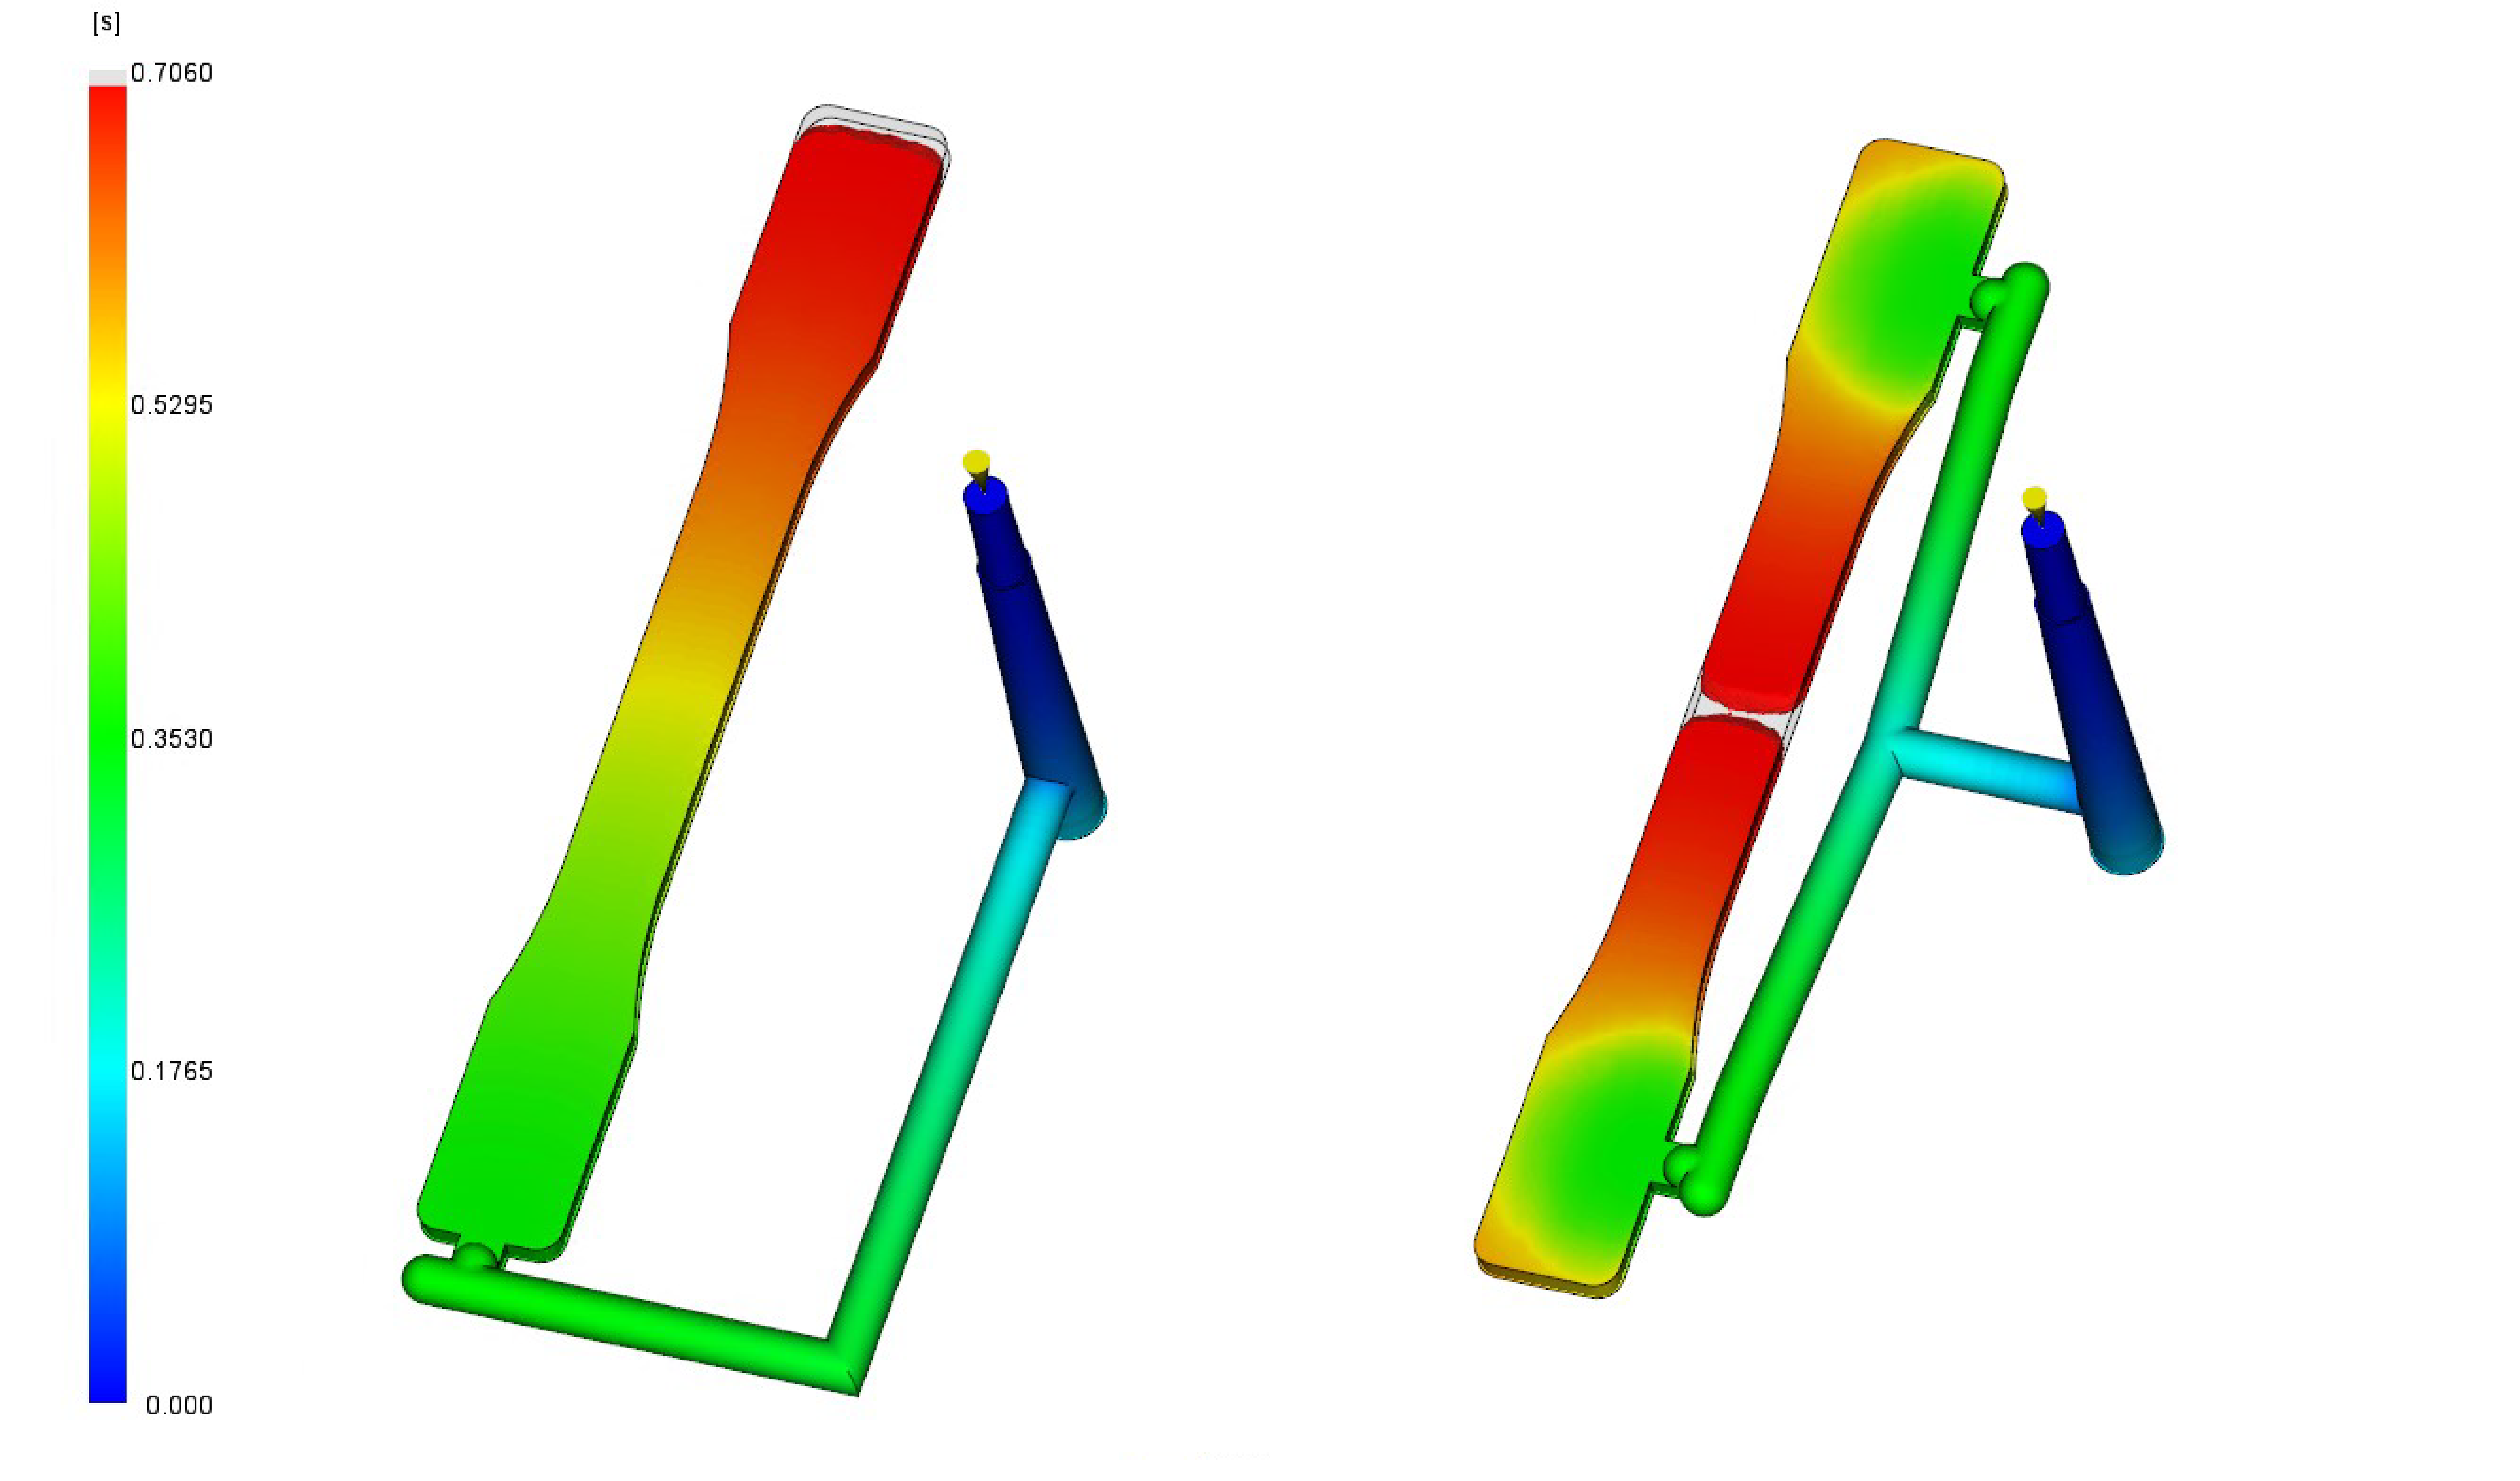 Figure 1. Mold filling simulation of molding single and dual gate sample Figure 1. Mold filling simulation of molding single and dual gate sample geometries. Color gradients represent fill time, the time taken to flow material to part during molding.